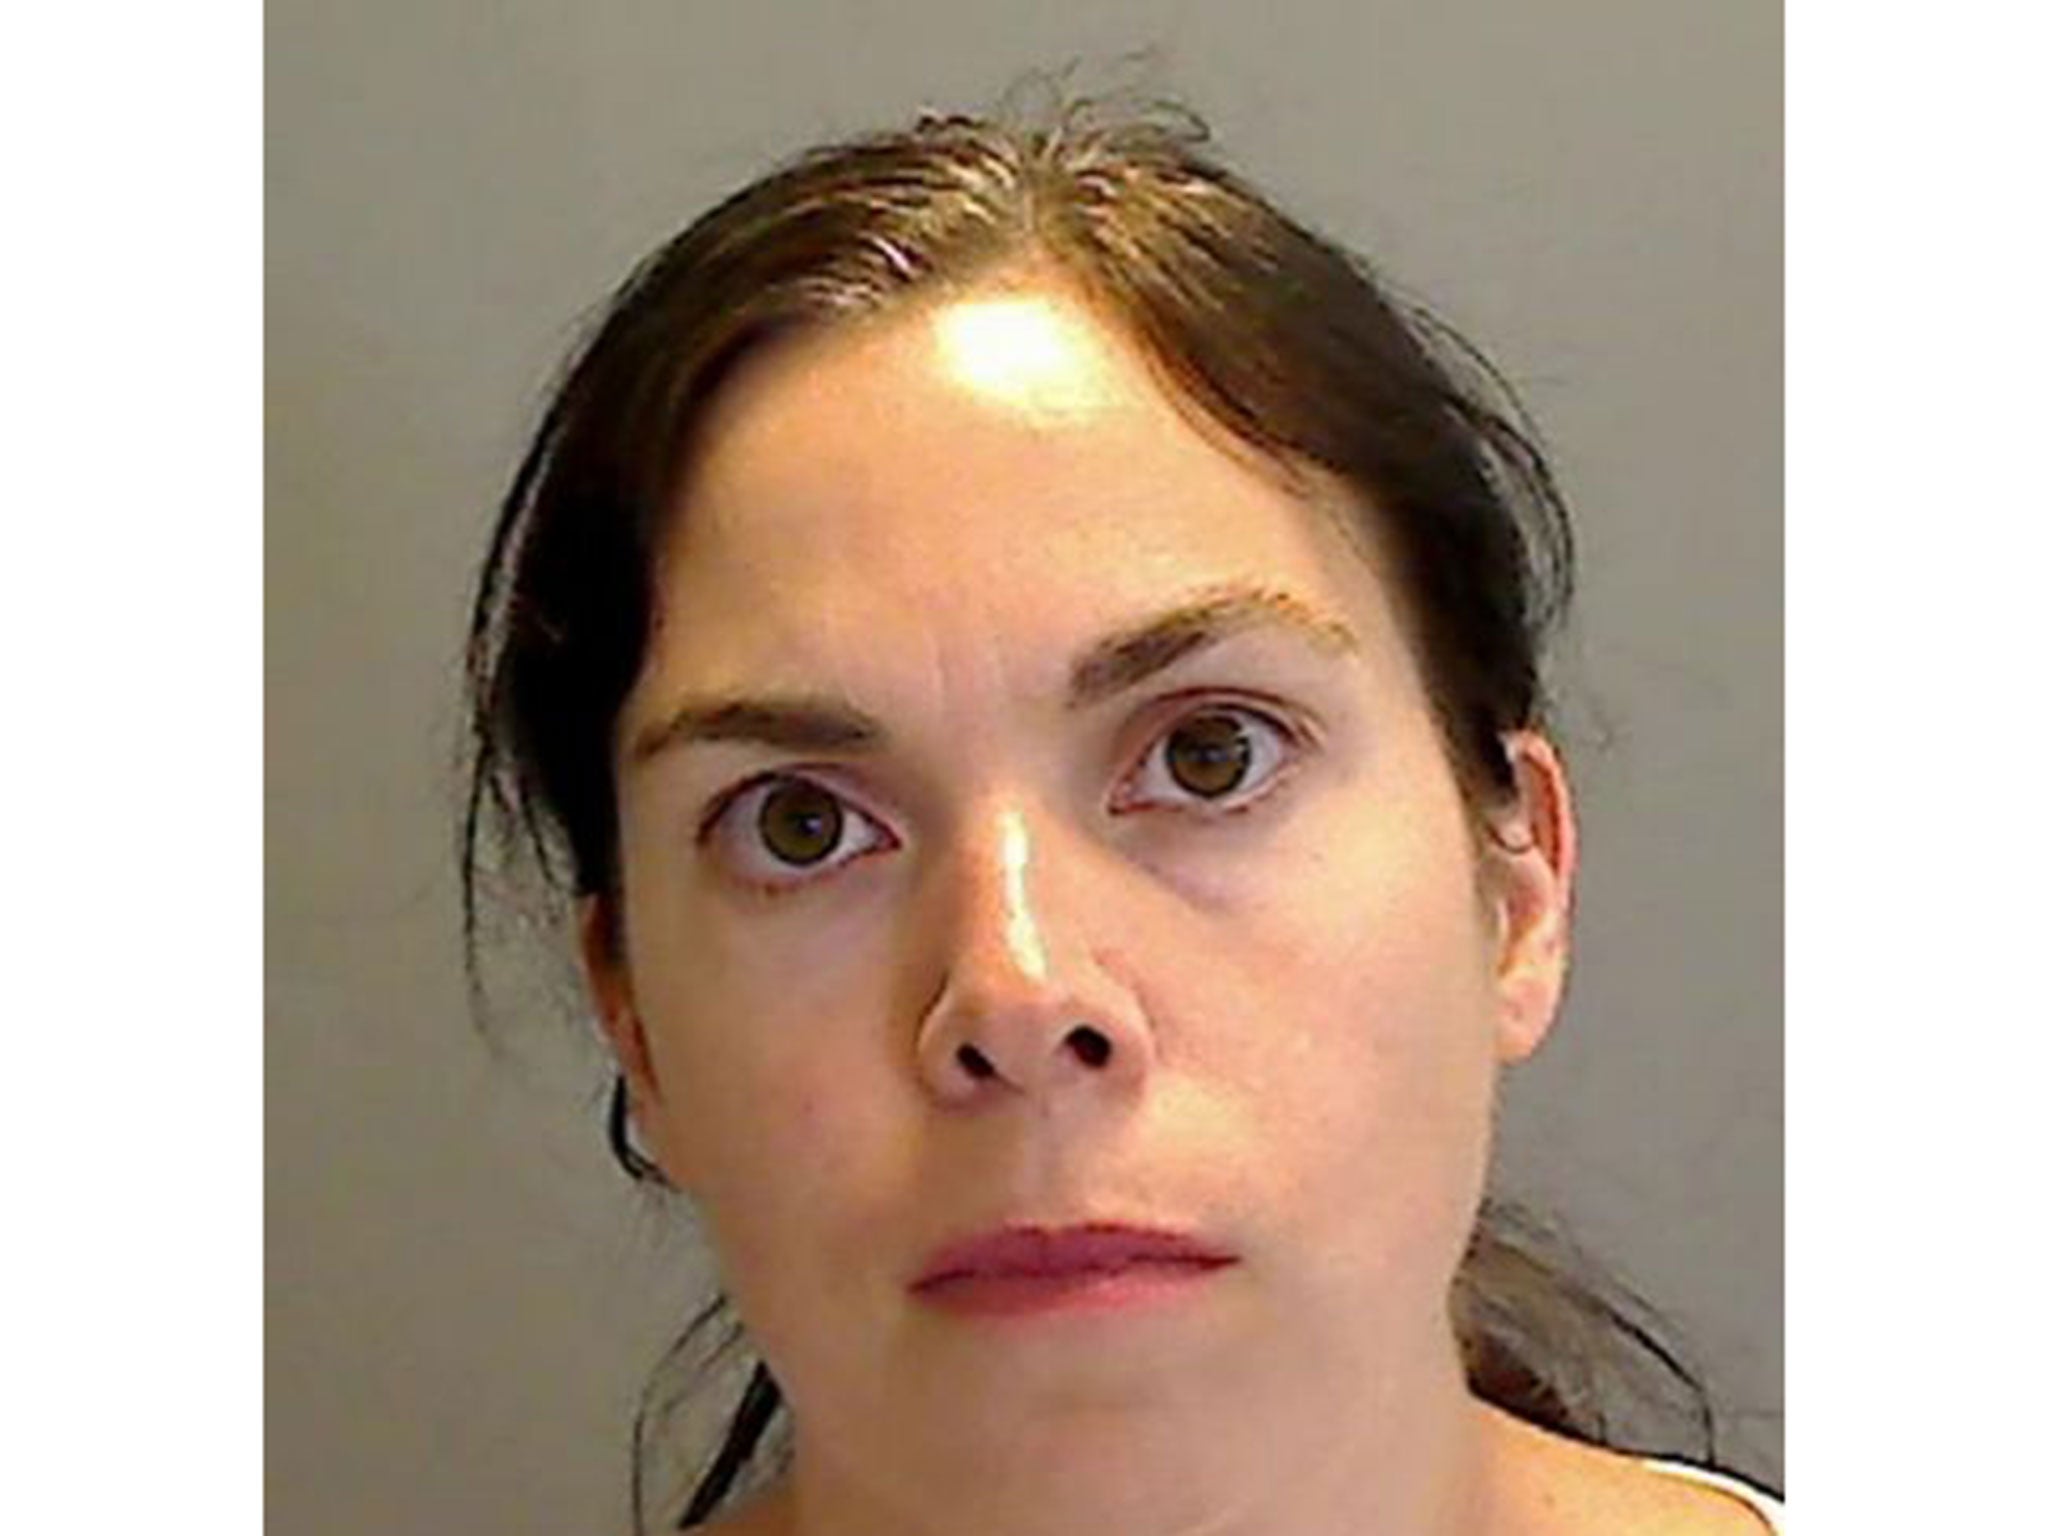 The paedophile ring is said to have centred around Marie Black, 34